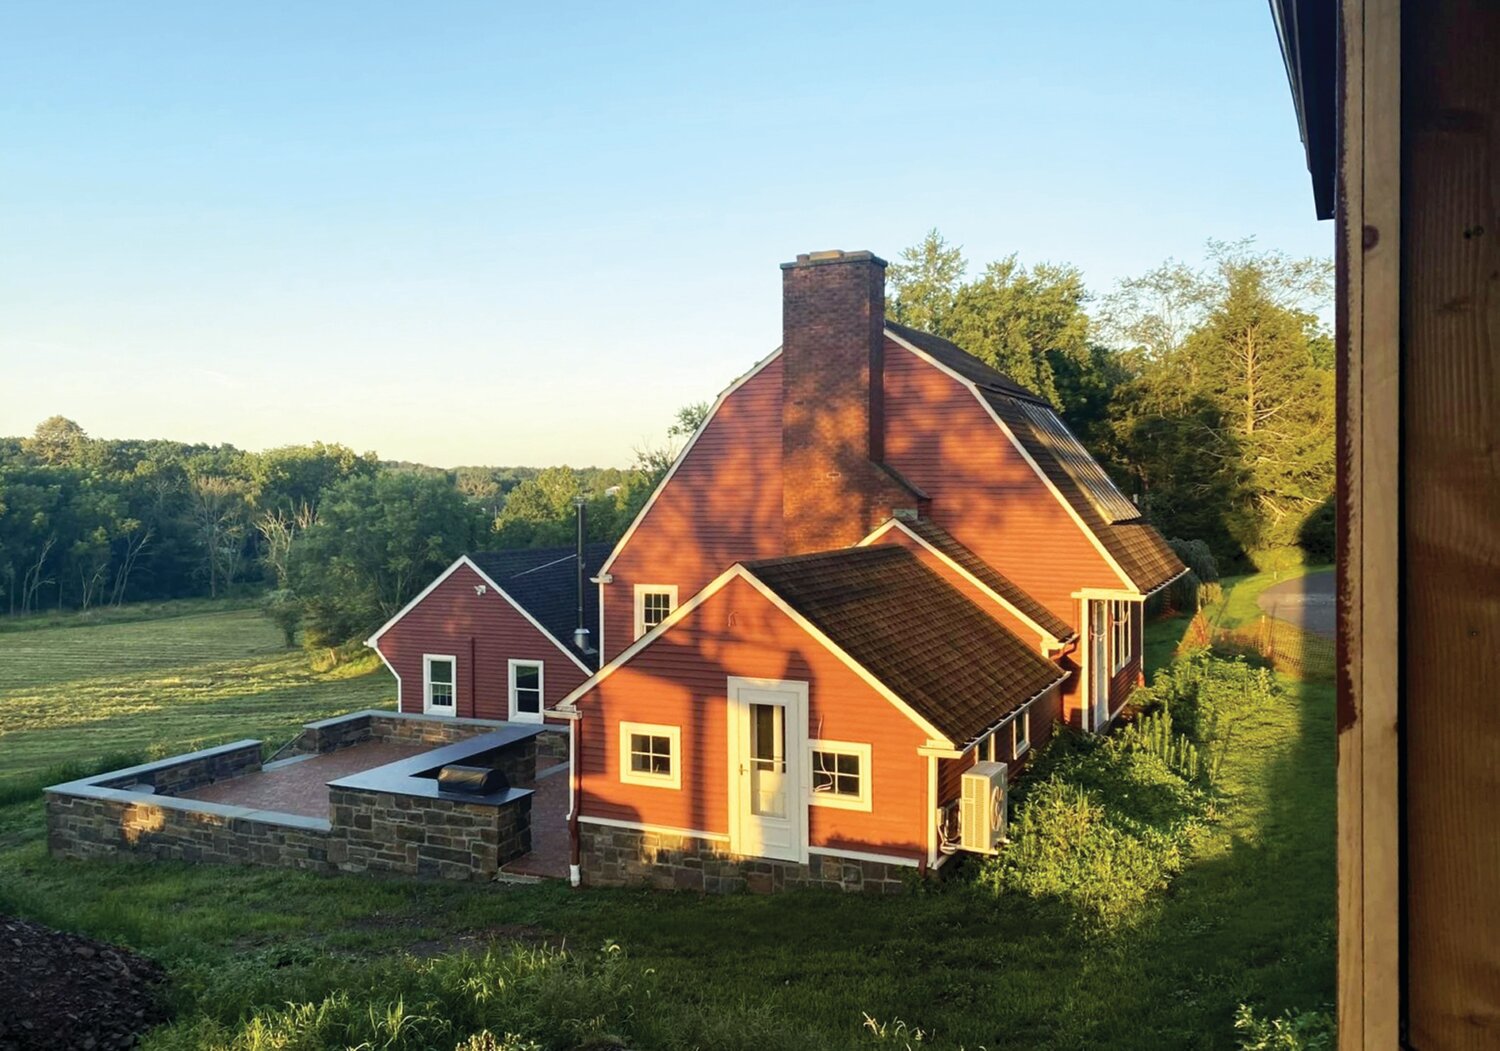 The milk house and artist’s studio at Sycamore Lane Farm in Hilltown are part of the 48th Bucks County Designer House & Gardens fundraiser for the Village Improvement Association of Doylestown. Tickets are on sale now.